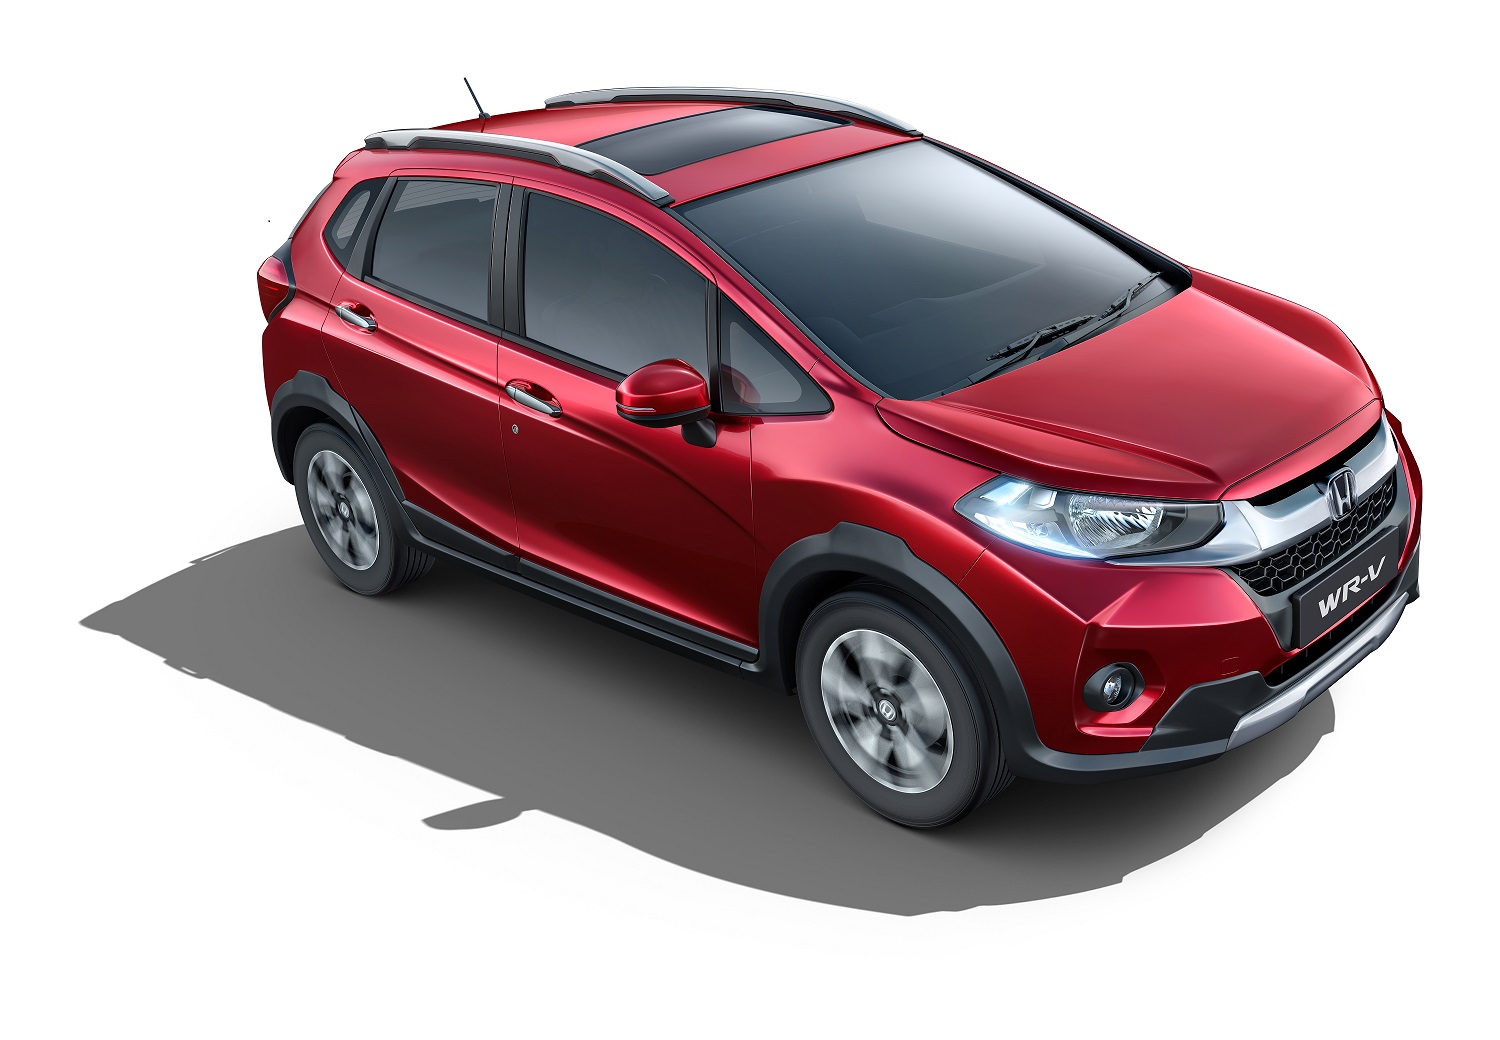 Honda Wr V Launched In New V Variant Existing S And Vx Updated